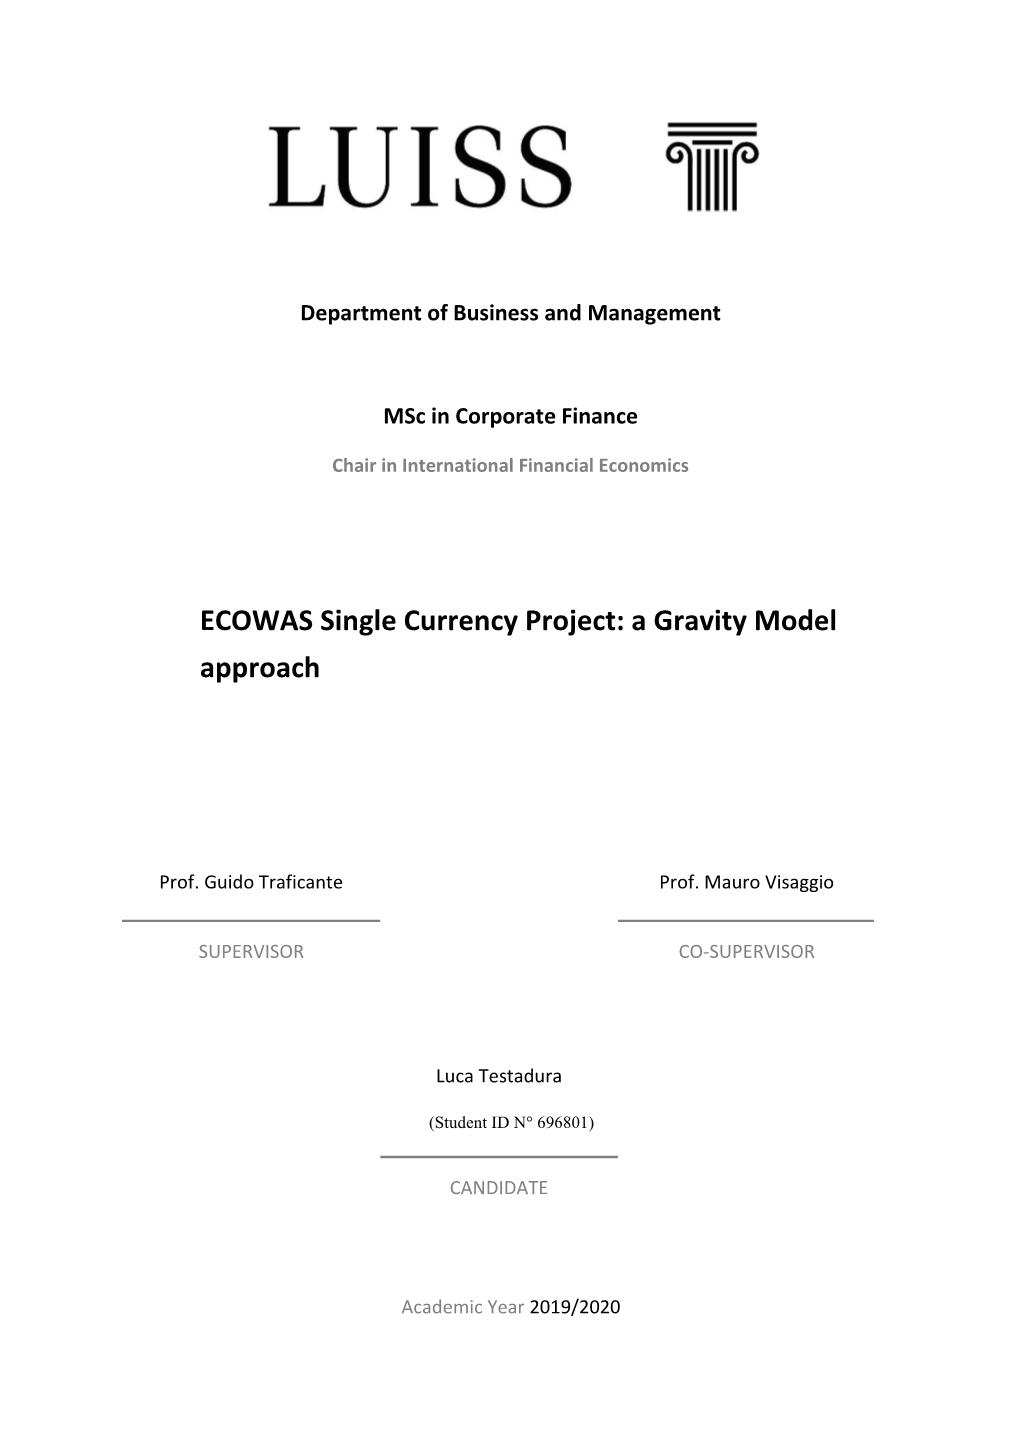 ECOWAS Single Currency Project: a Gravity Model Approach